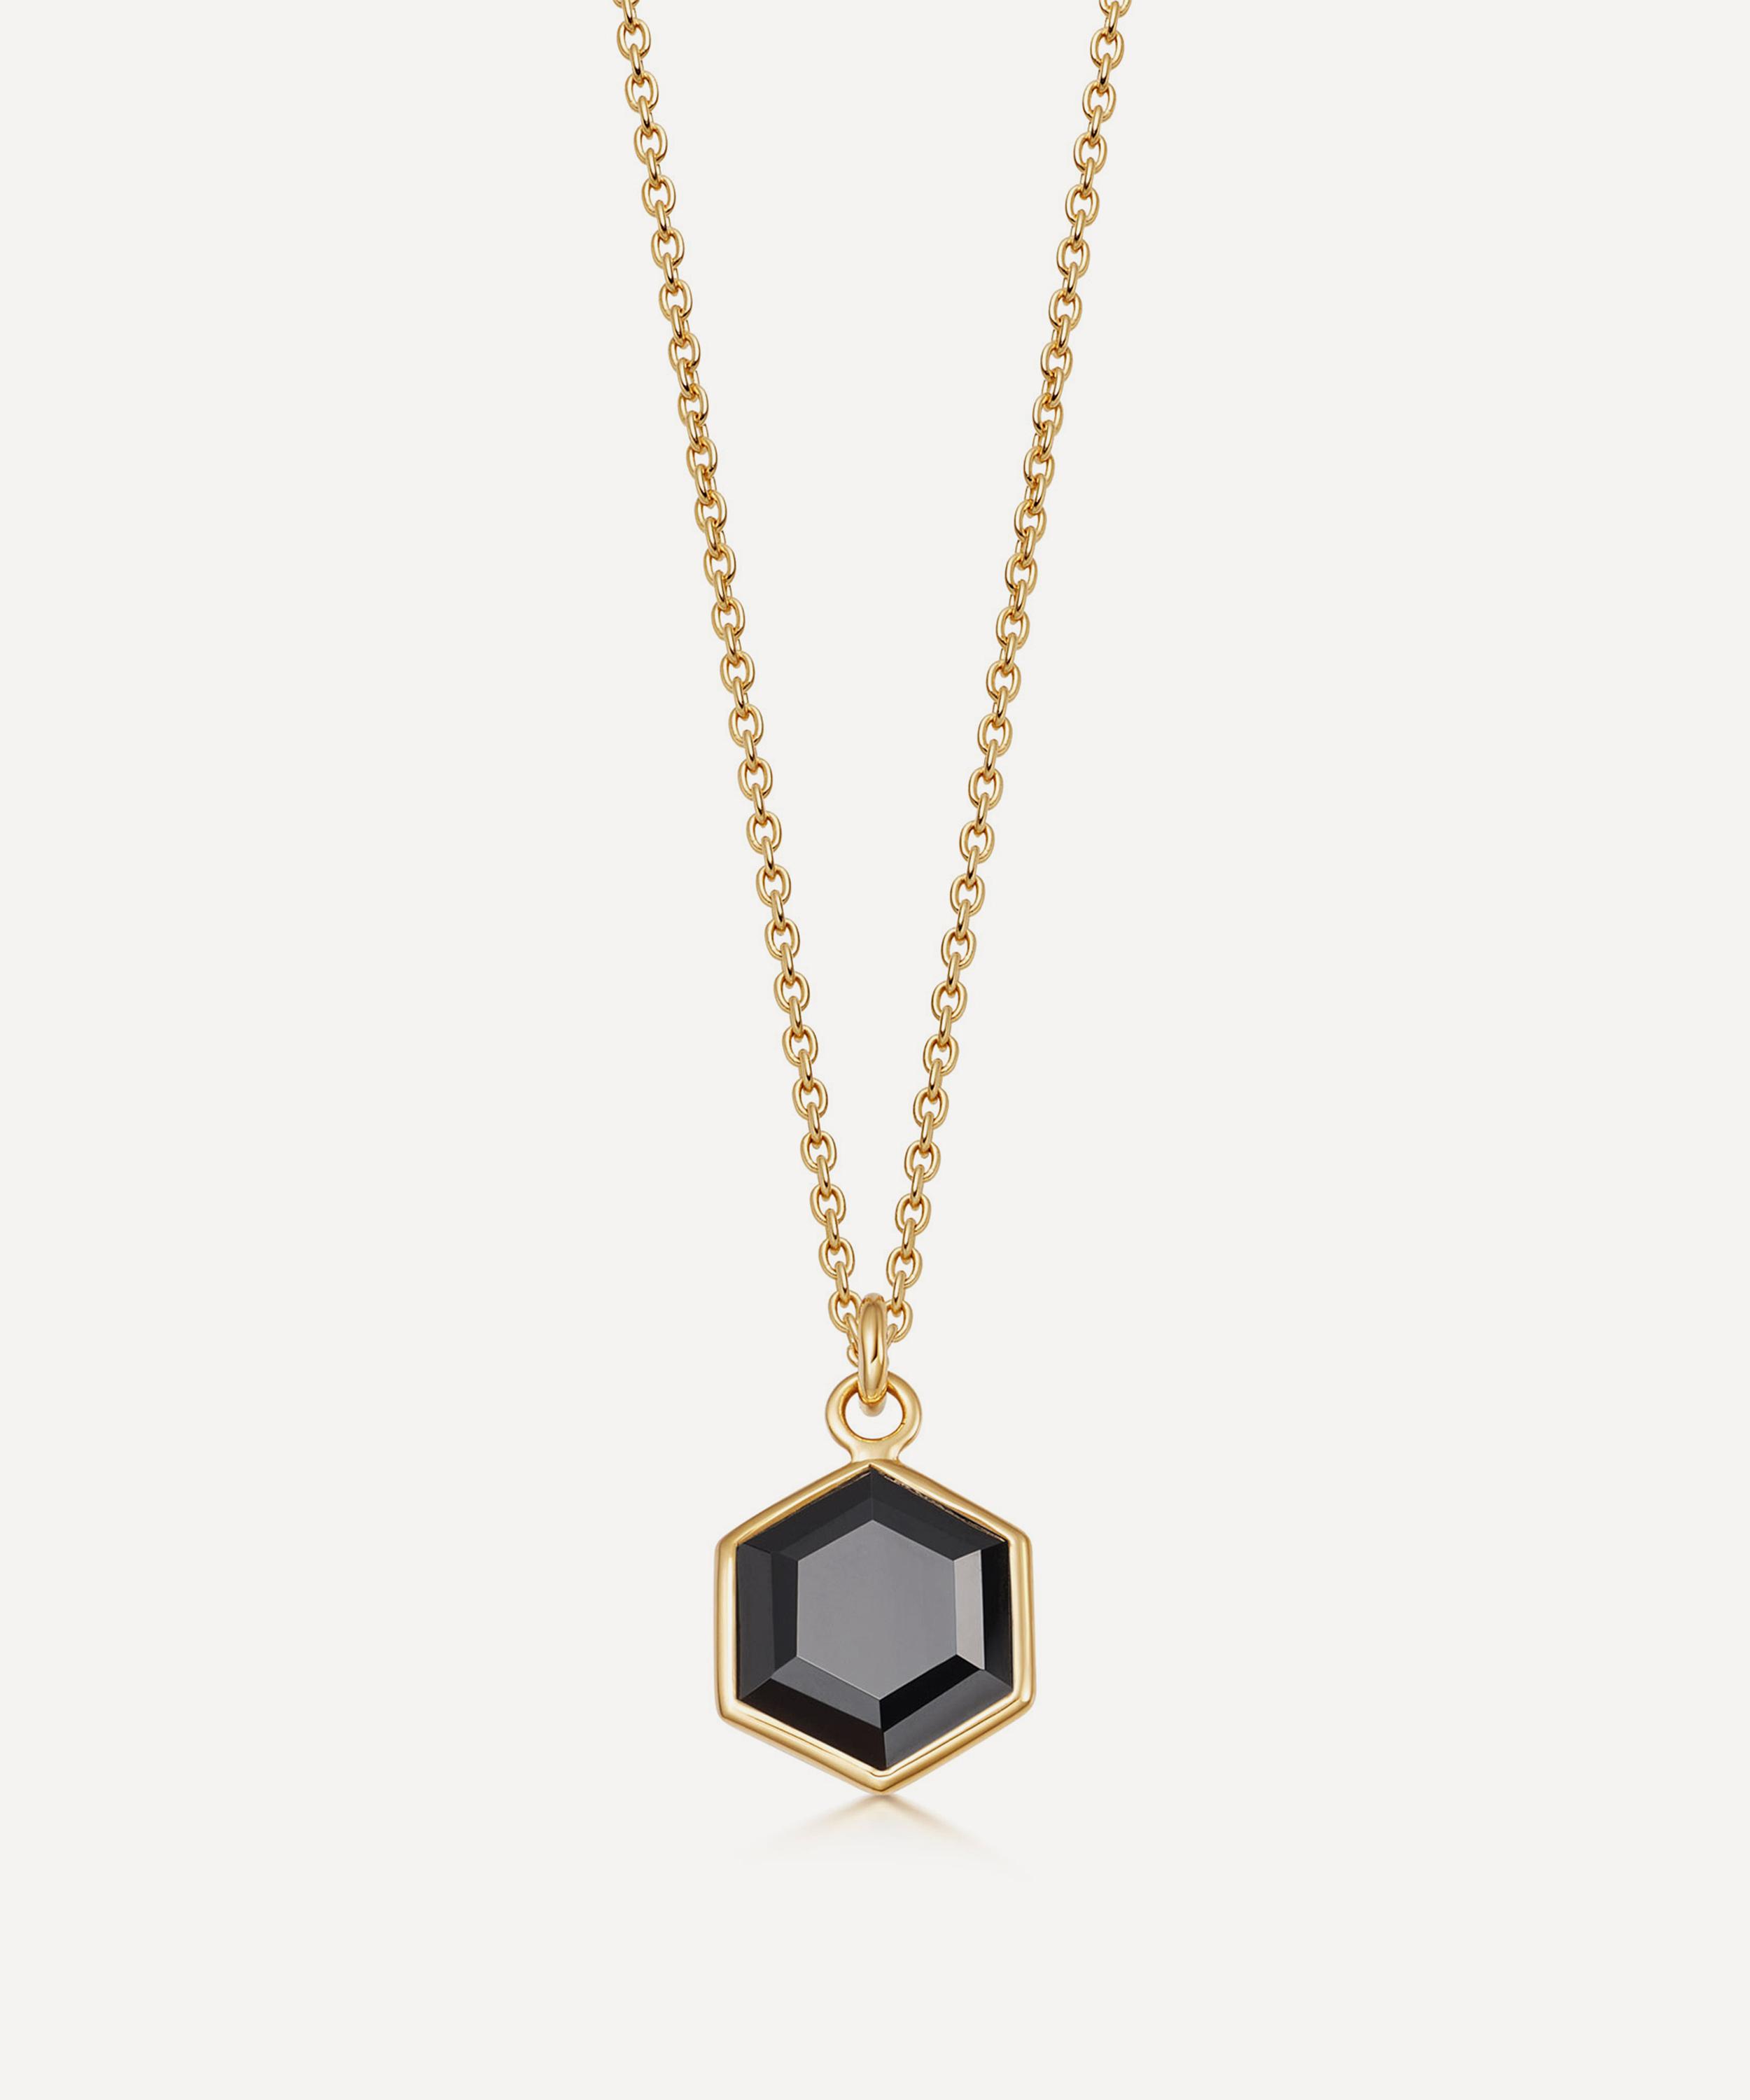 ASTLEY CLARKE 18CT GOLD PLATED VERMEIL SILVER DECO BLACK SPINEL PENDANT NECKLACE,000741897